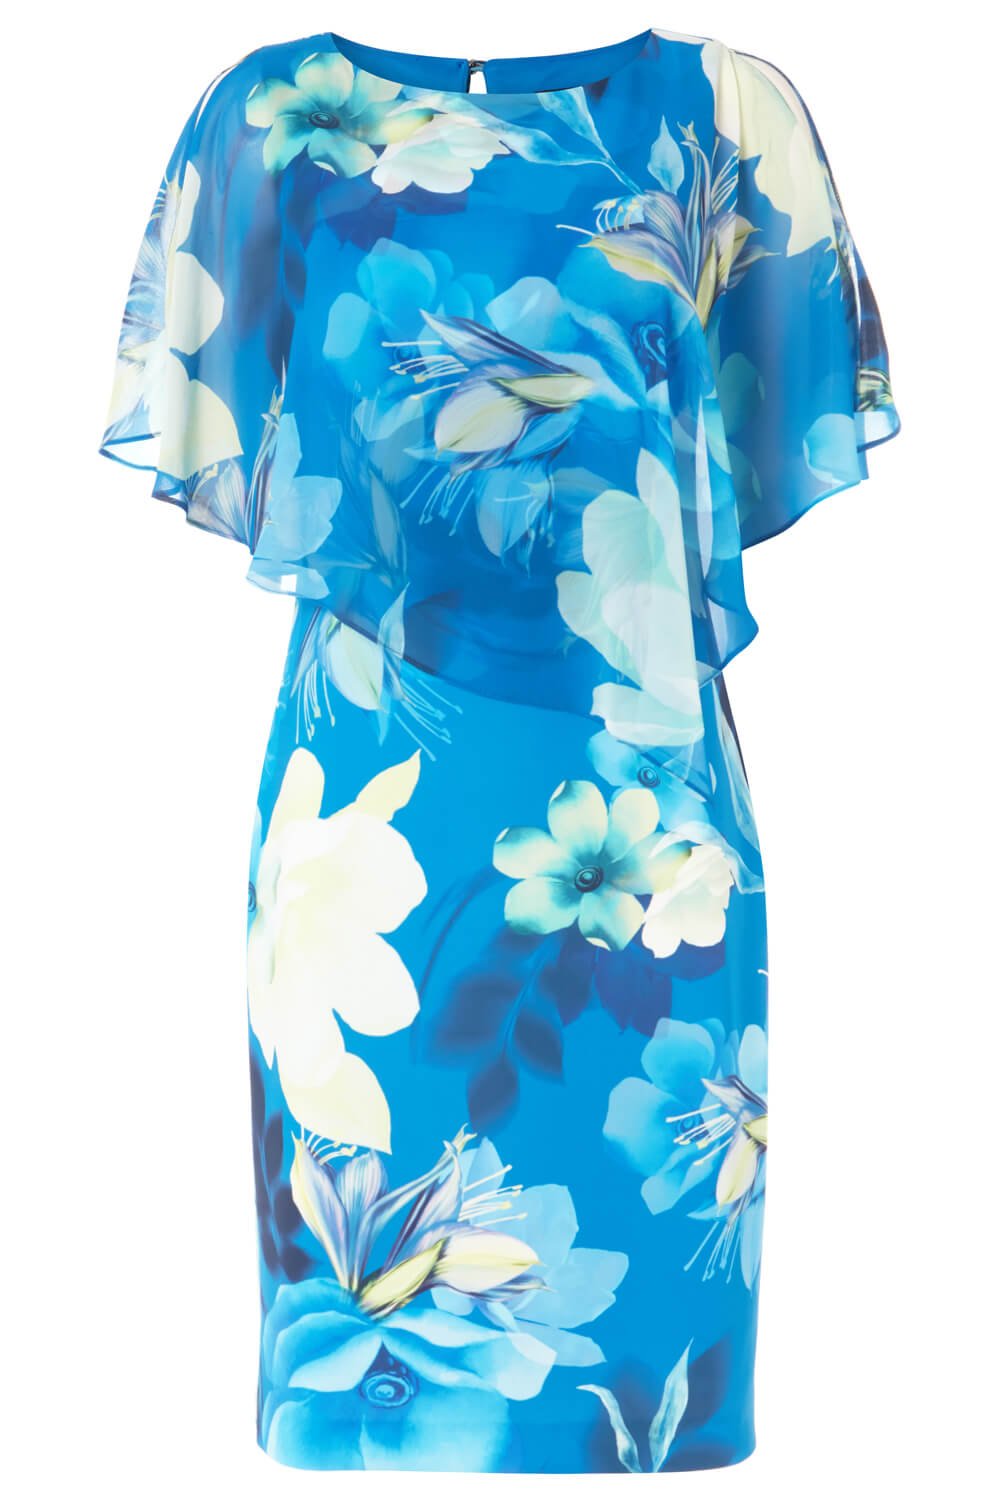 Blue Floral Overlay Chiffon Dress, Image 4 of 4